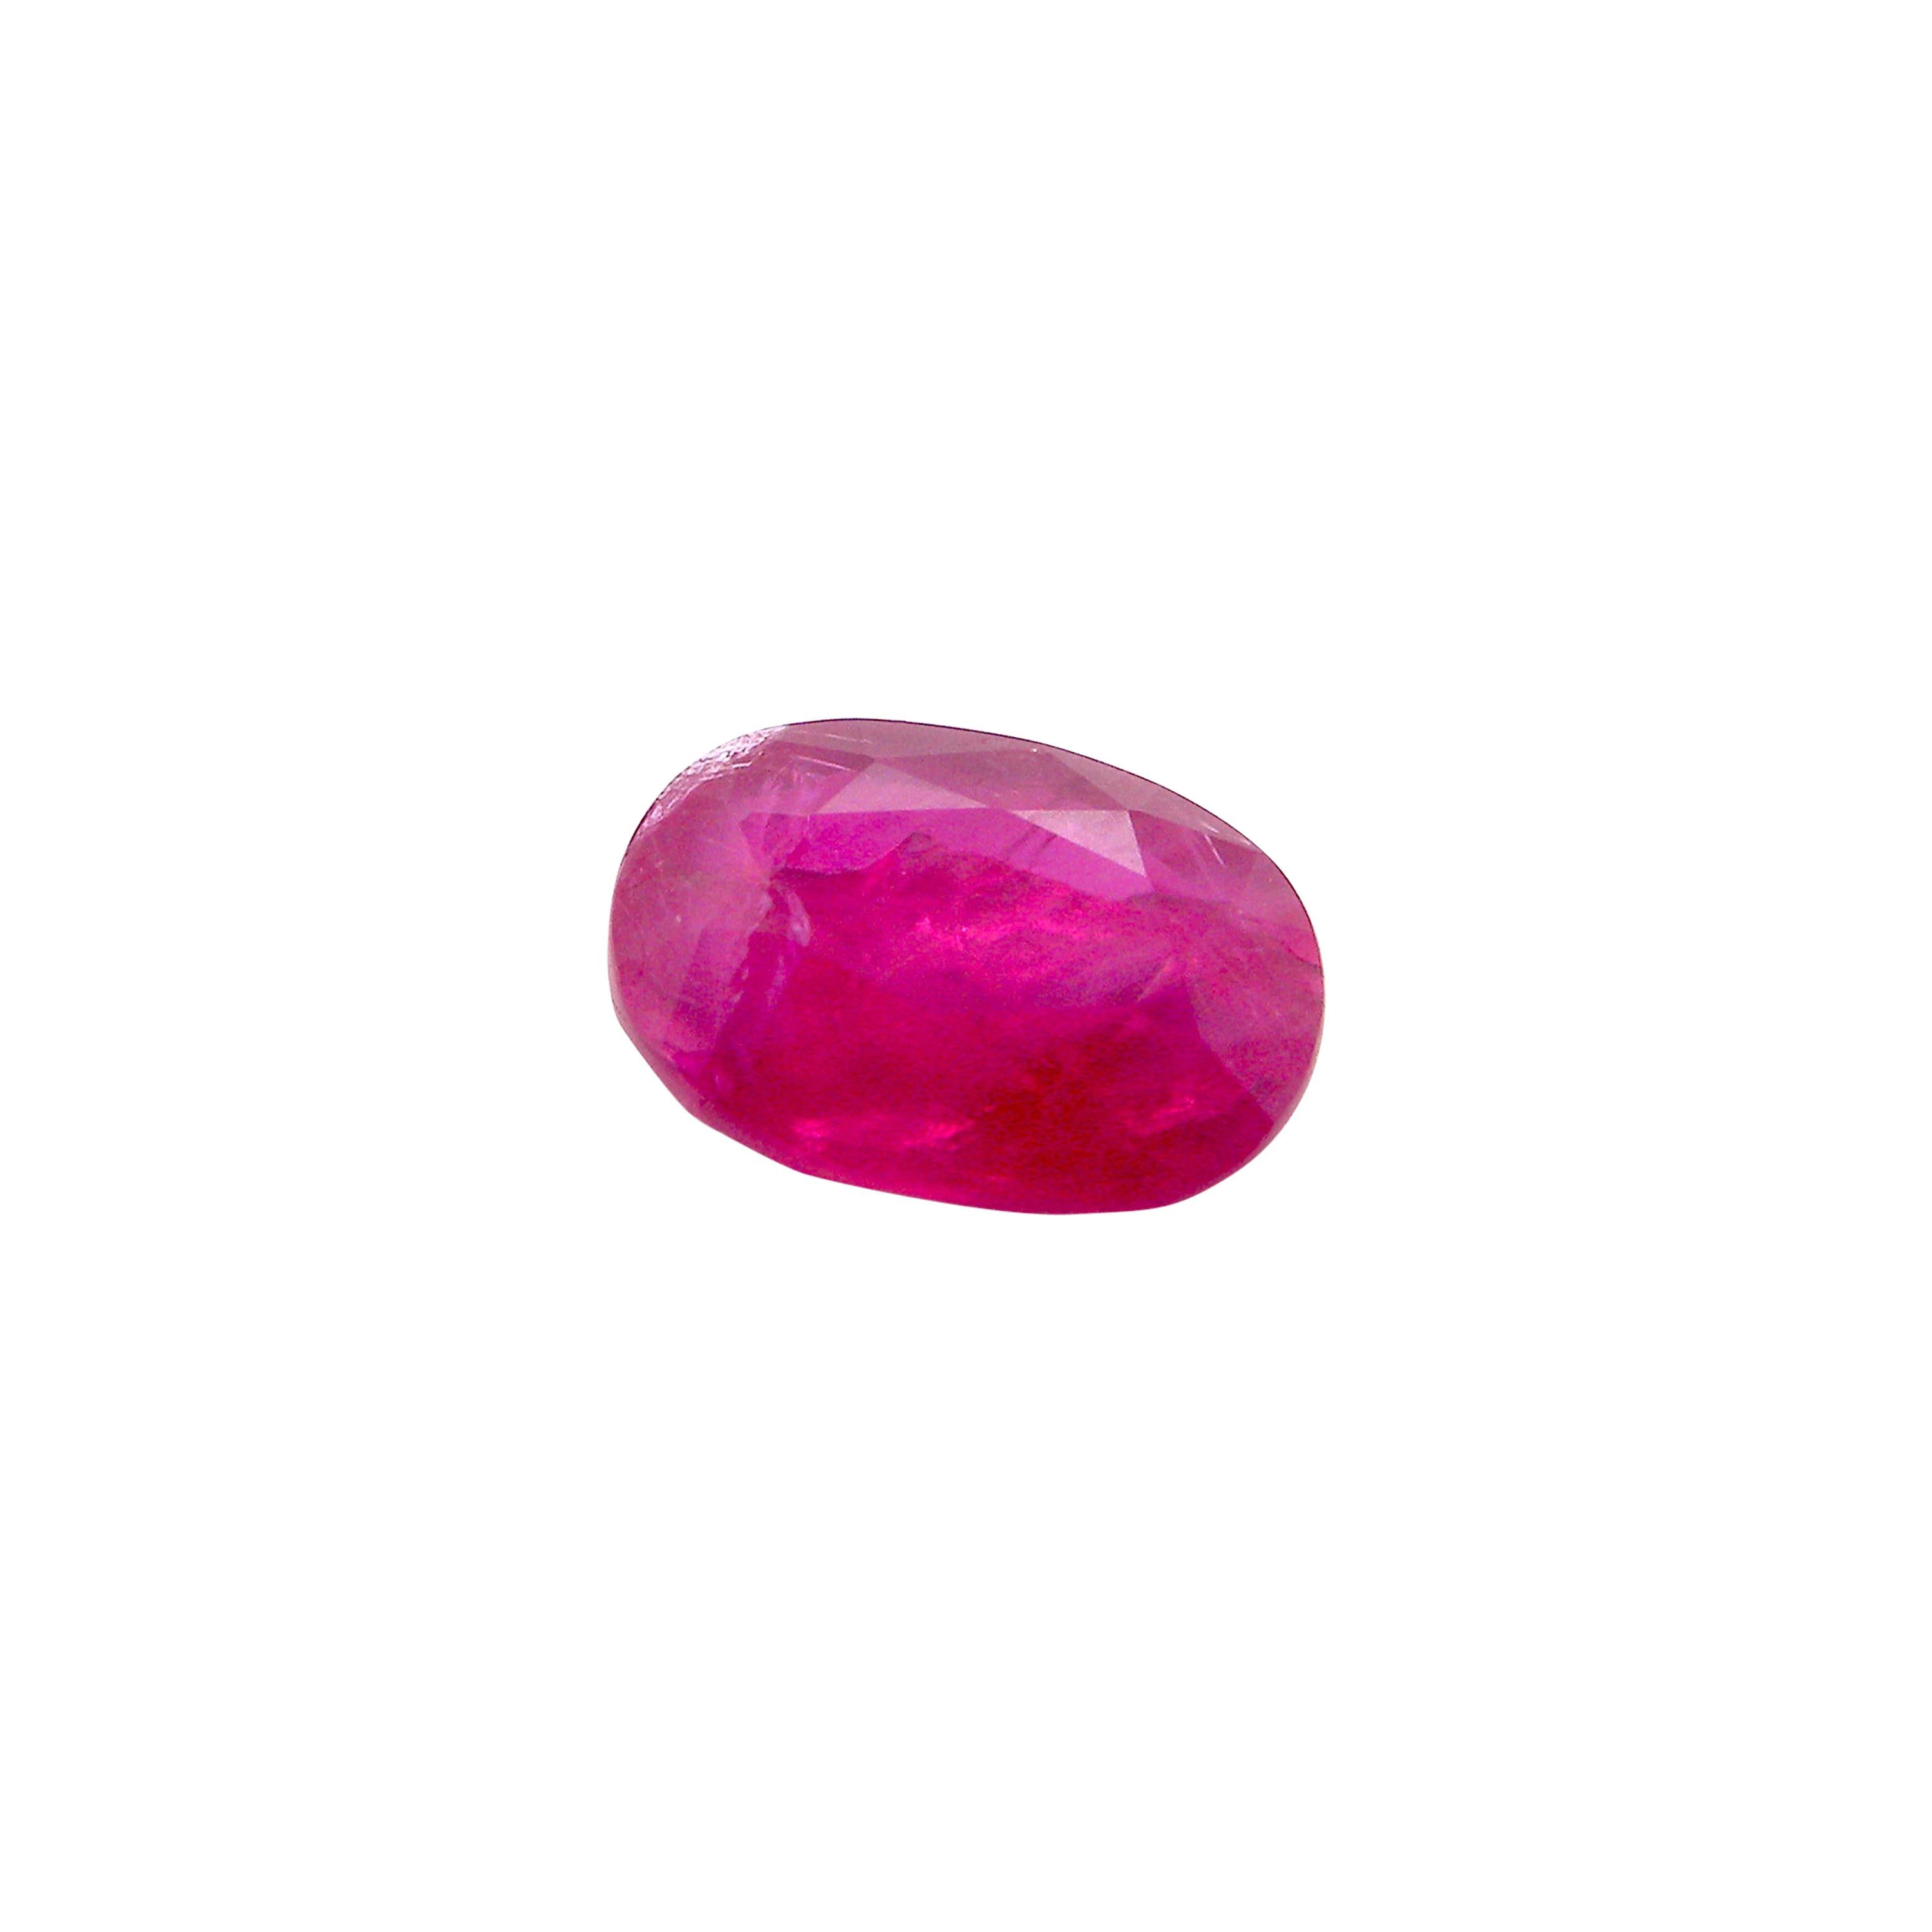 1.91 Carat Unheated Oval-Cut Burmese Pinkish-Red Ruby:

A beautiful gem, it is a 1.91 carat unheated Burmese oval-cut ruby. Hailing from the historic Mogok mines in Burma, the ruby possesses a pinkish-red colour saturation, with good lustre and